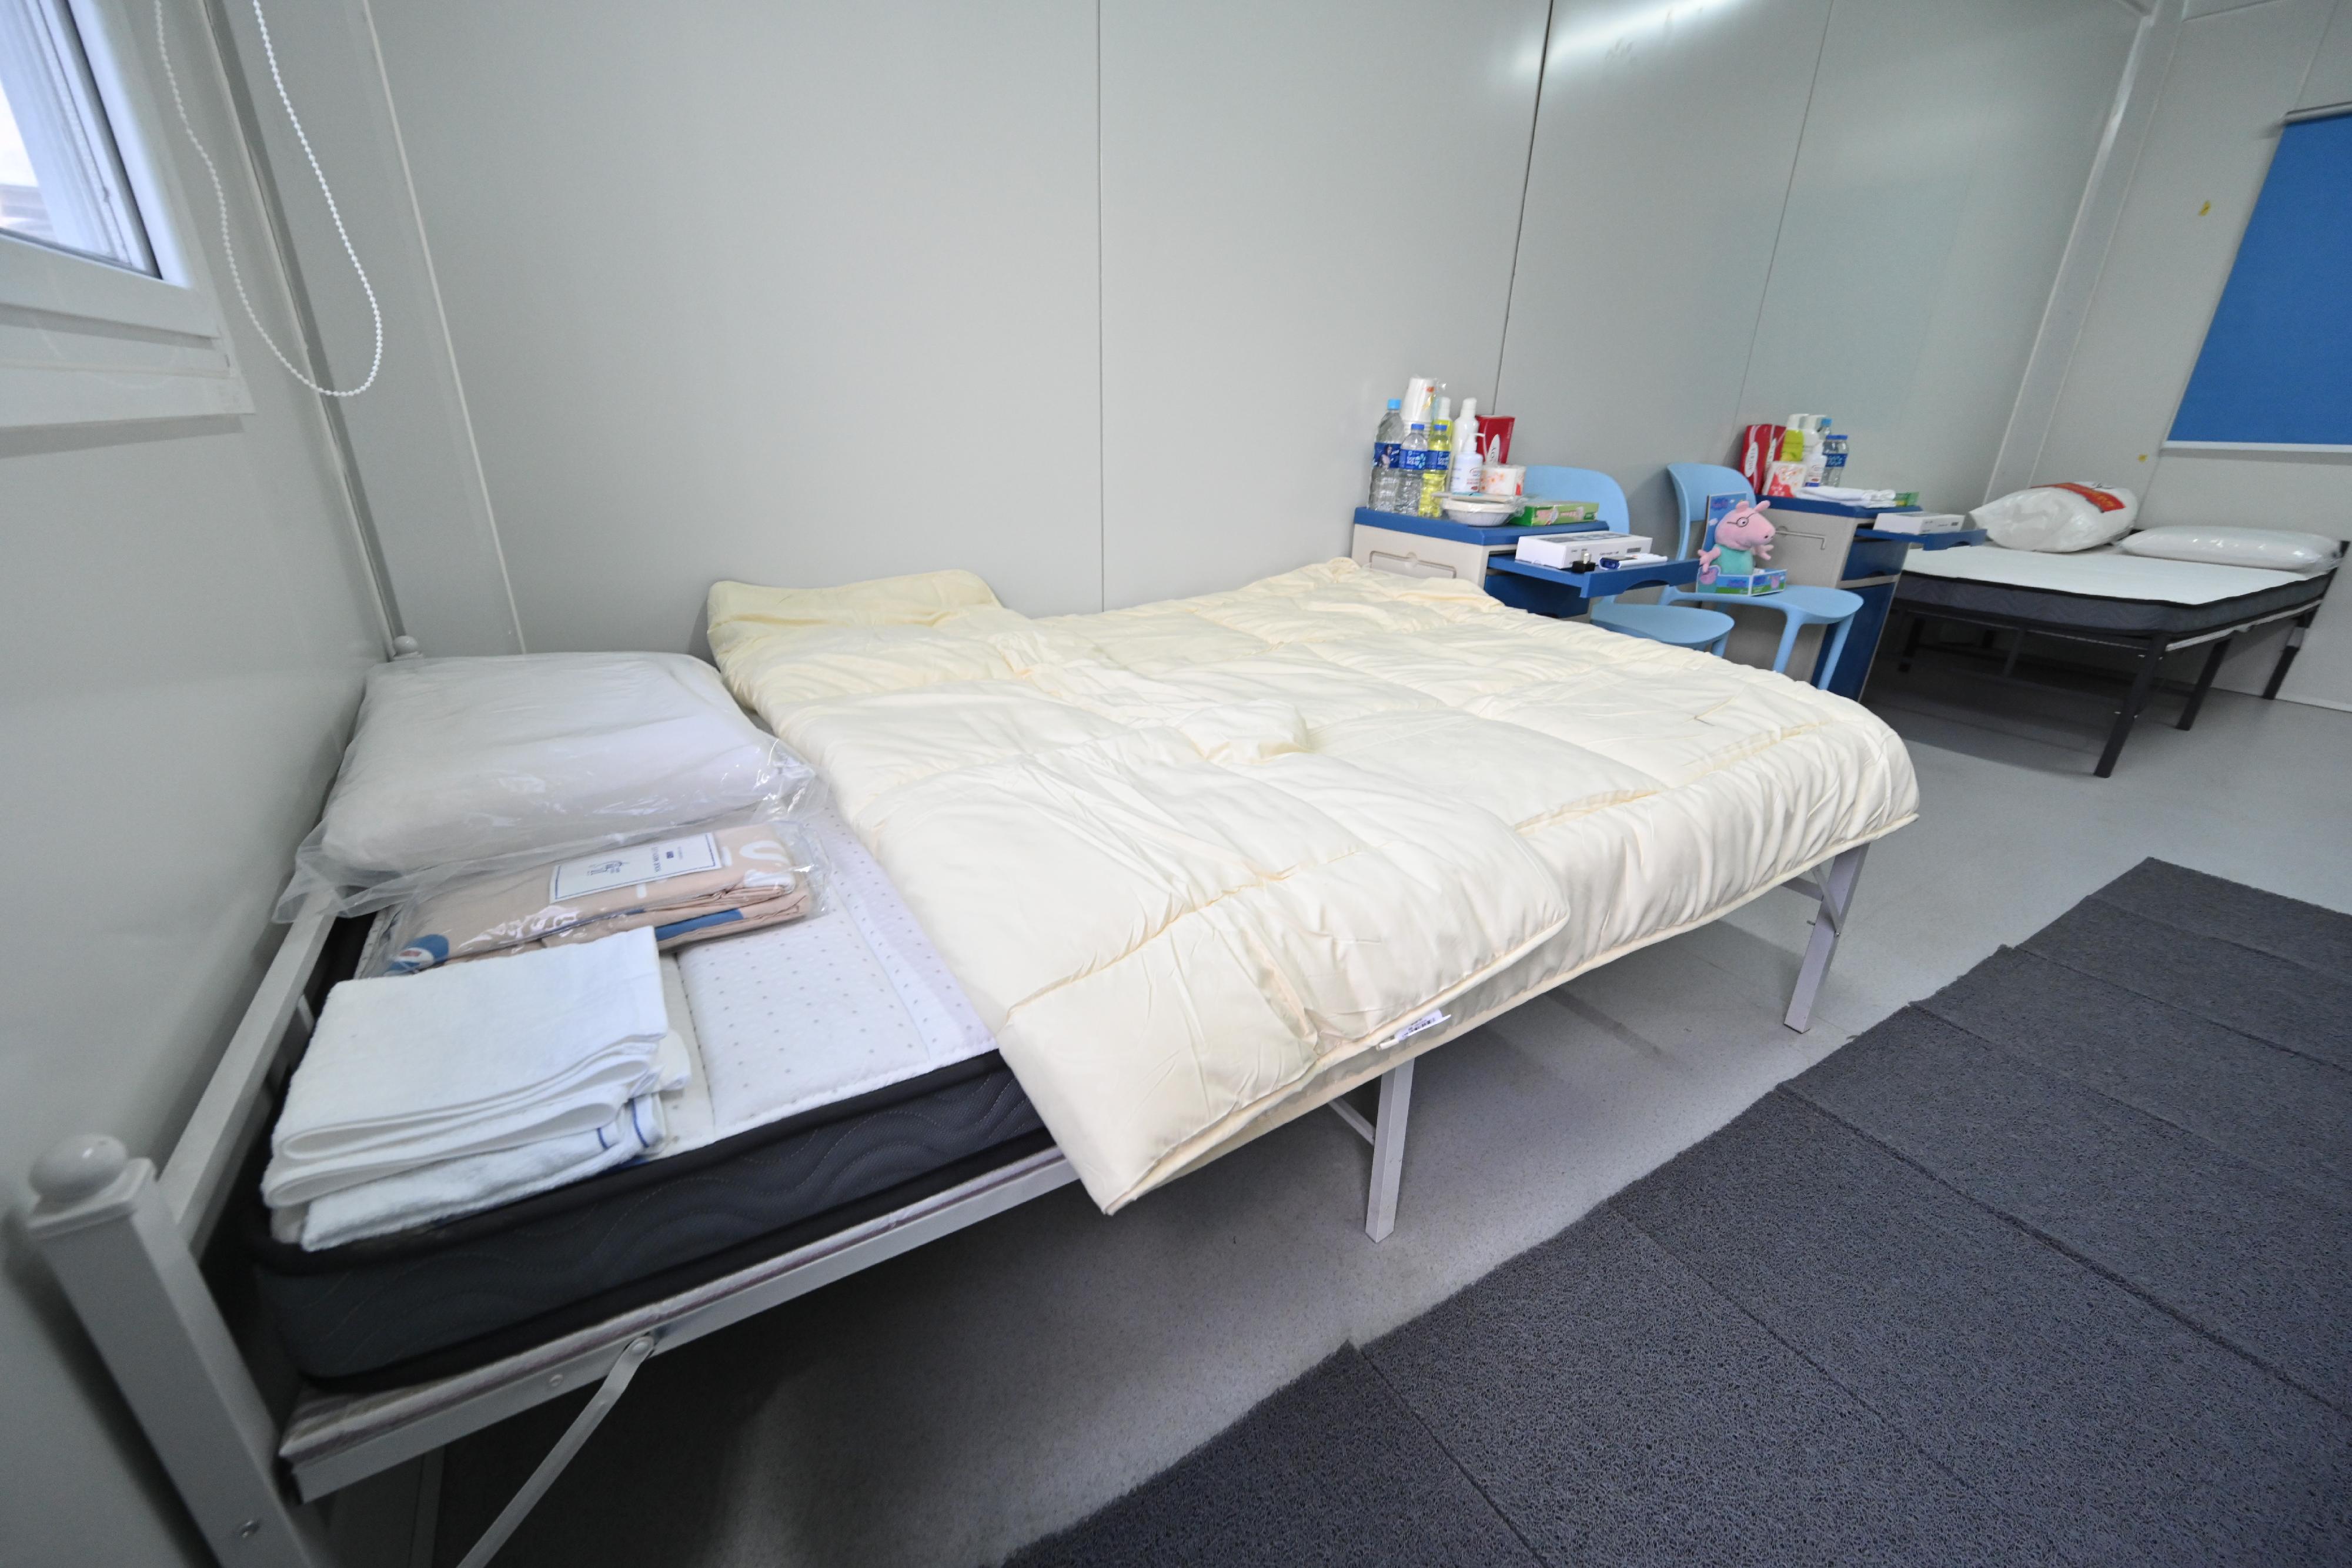 A spokesman for the Security Bureau today (March 8) said that to let quarantined persons feel at ease in an unfamiliar environment, the Tsing Yi community isolation facility (TYCIF) will adopt a small-district and humanised approach, and continue to refine its services in response to the feedback of the occupants. Photo shows the layout of a room at the TYCIF.